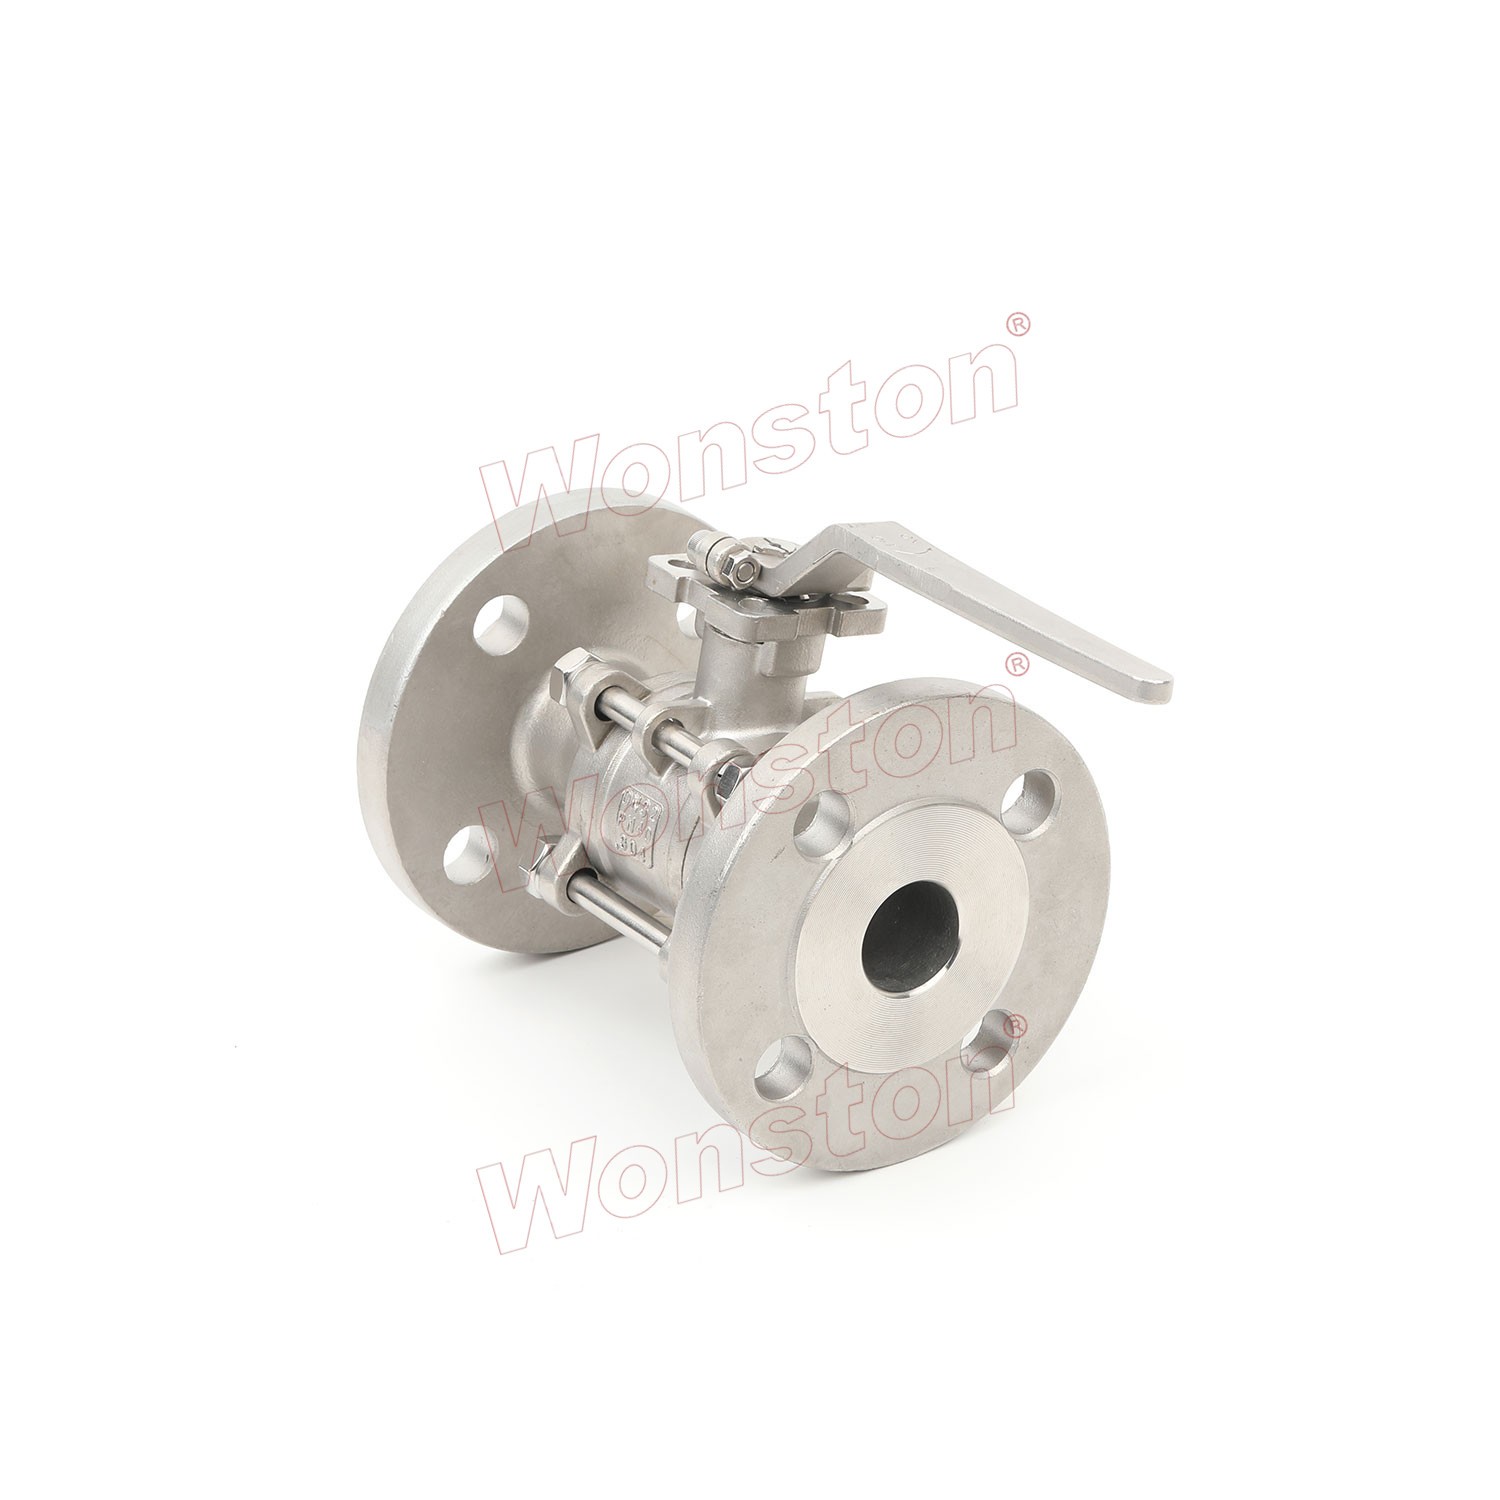 3PC Ball Valve Flanged End Direct Mounting Pad 300LB